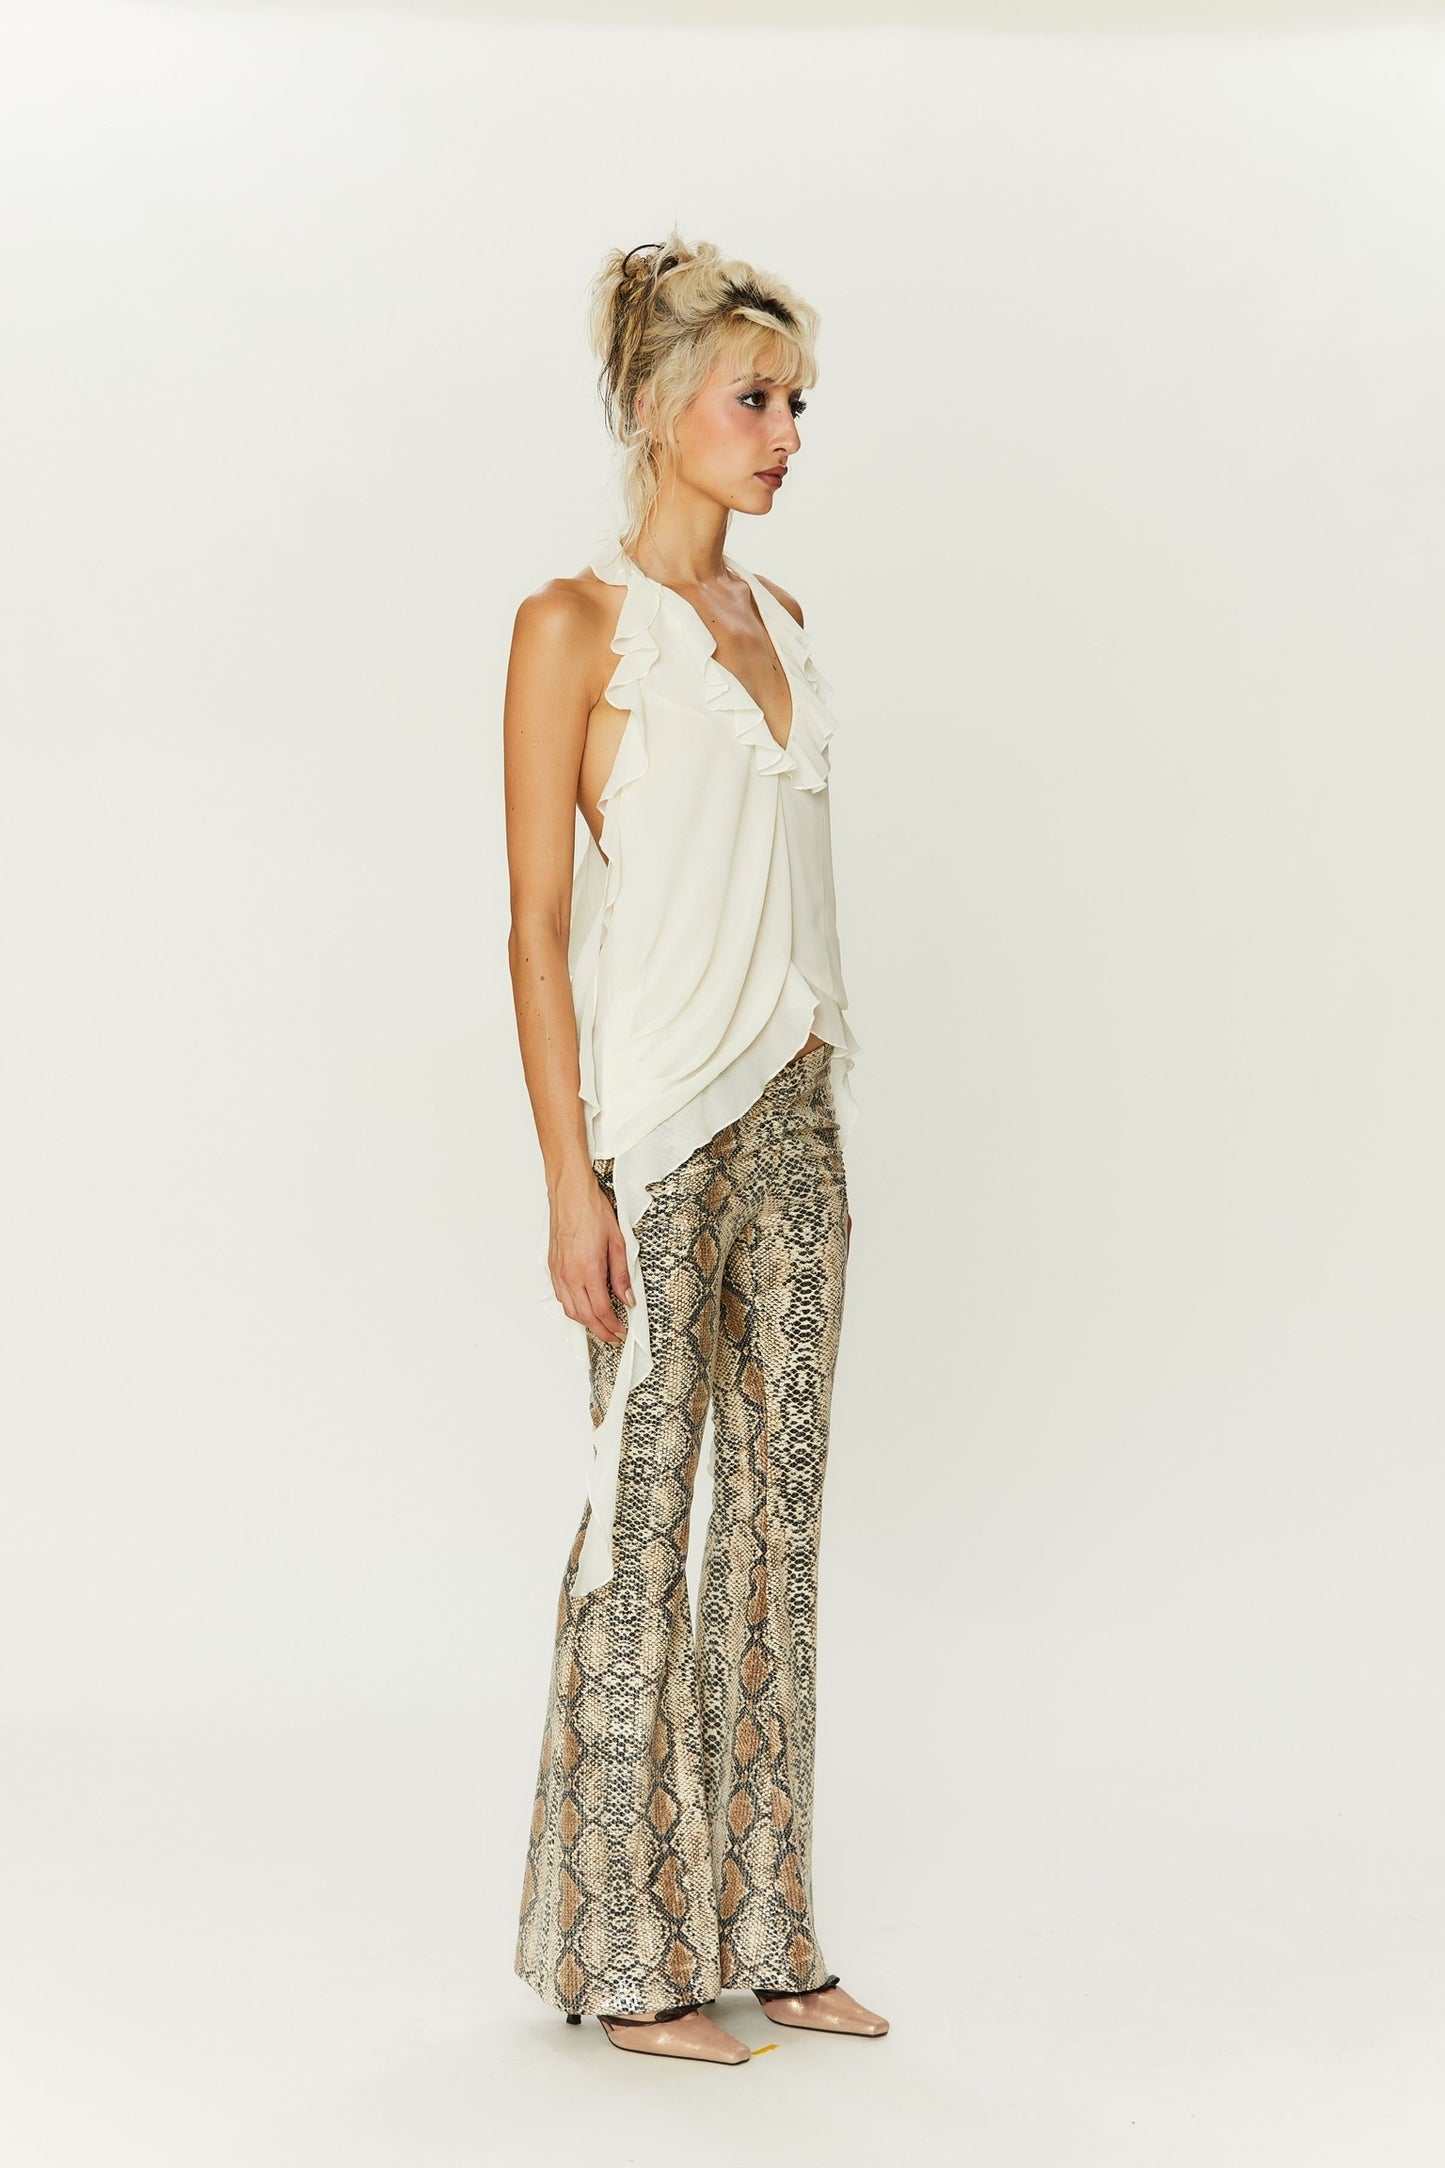 Yala Sequined Flared Pants in Brown